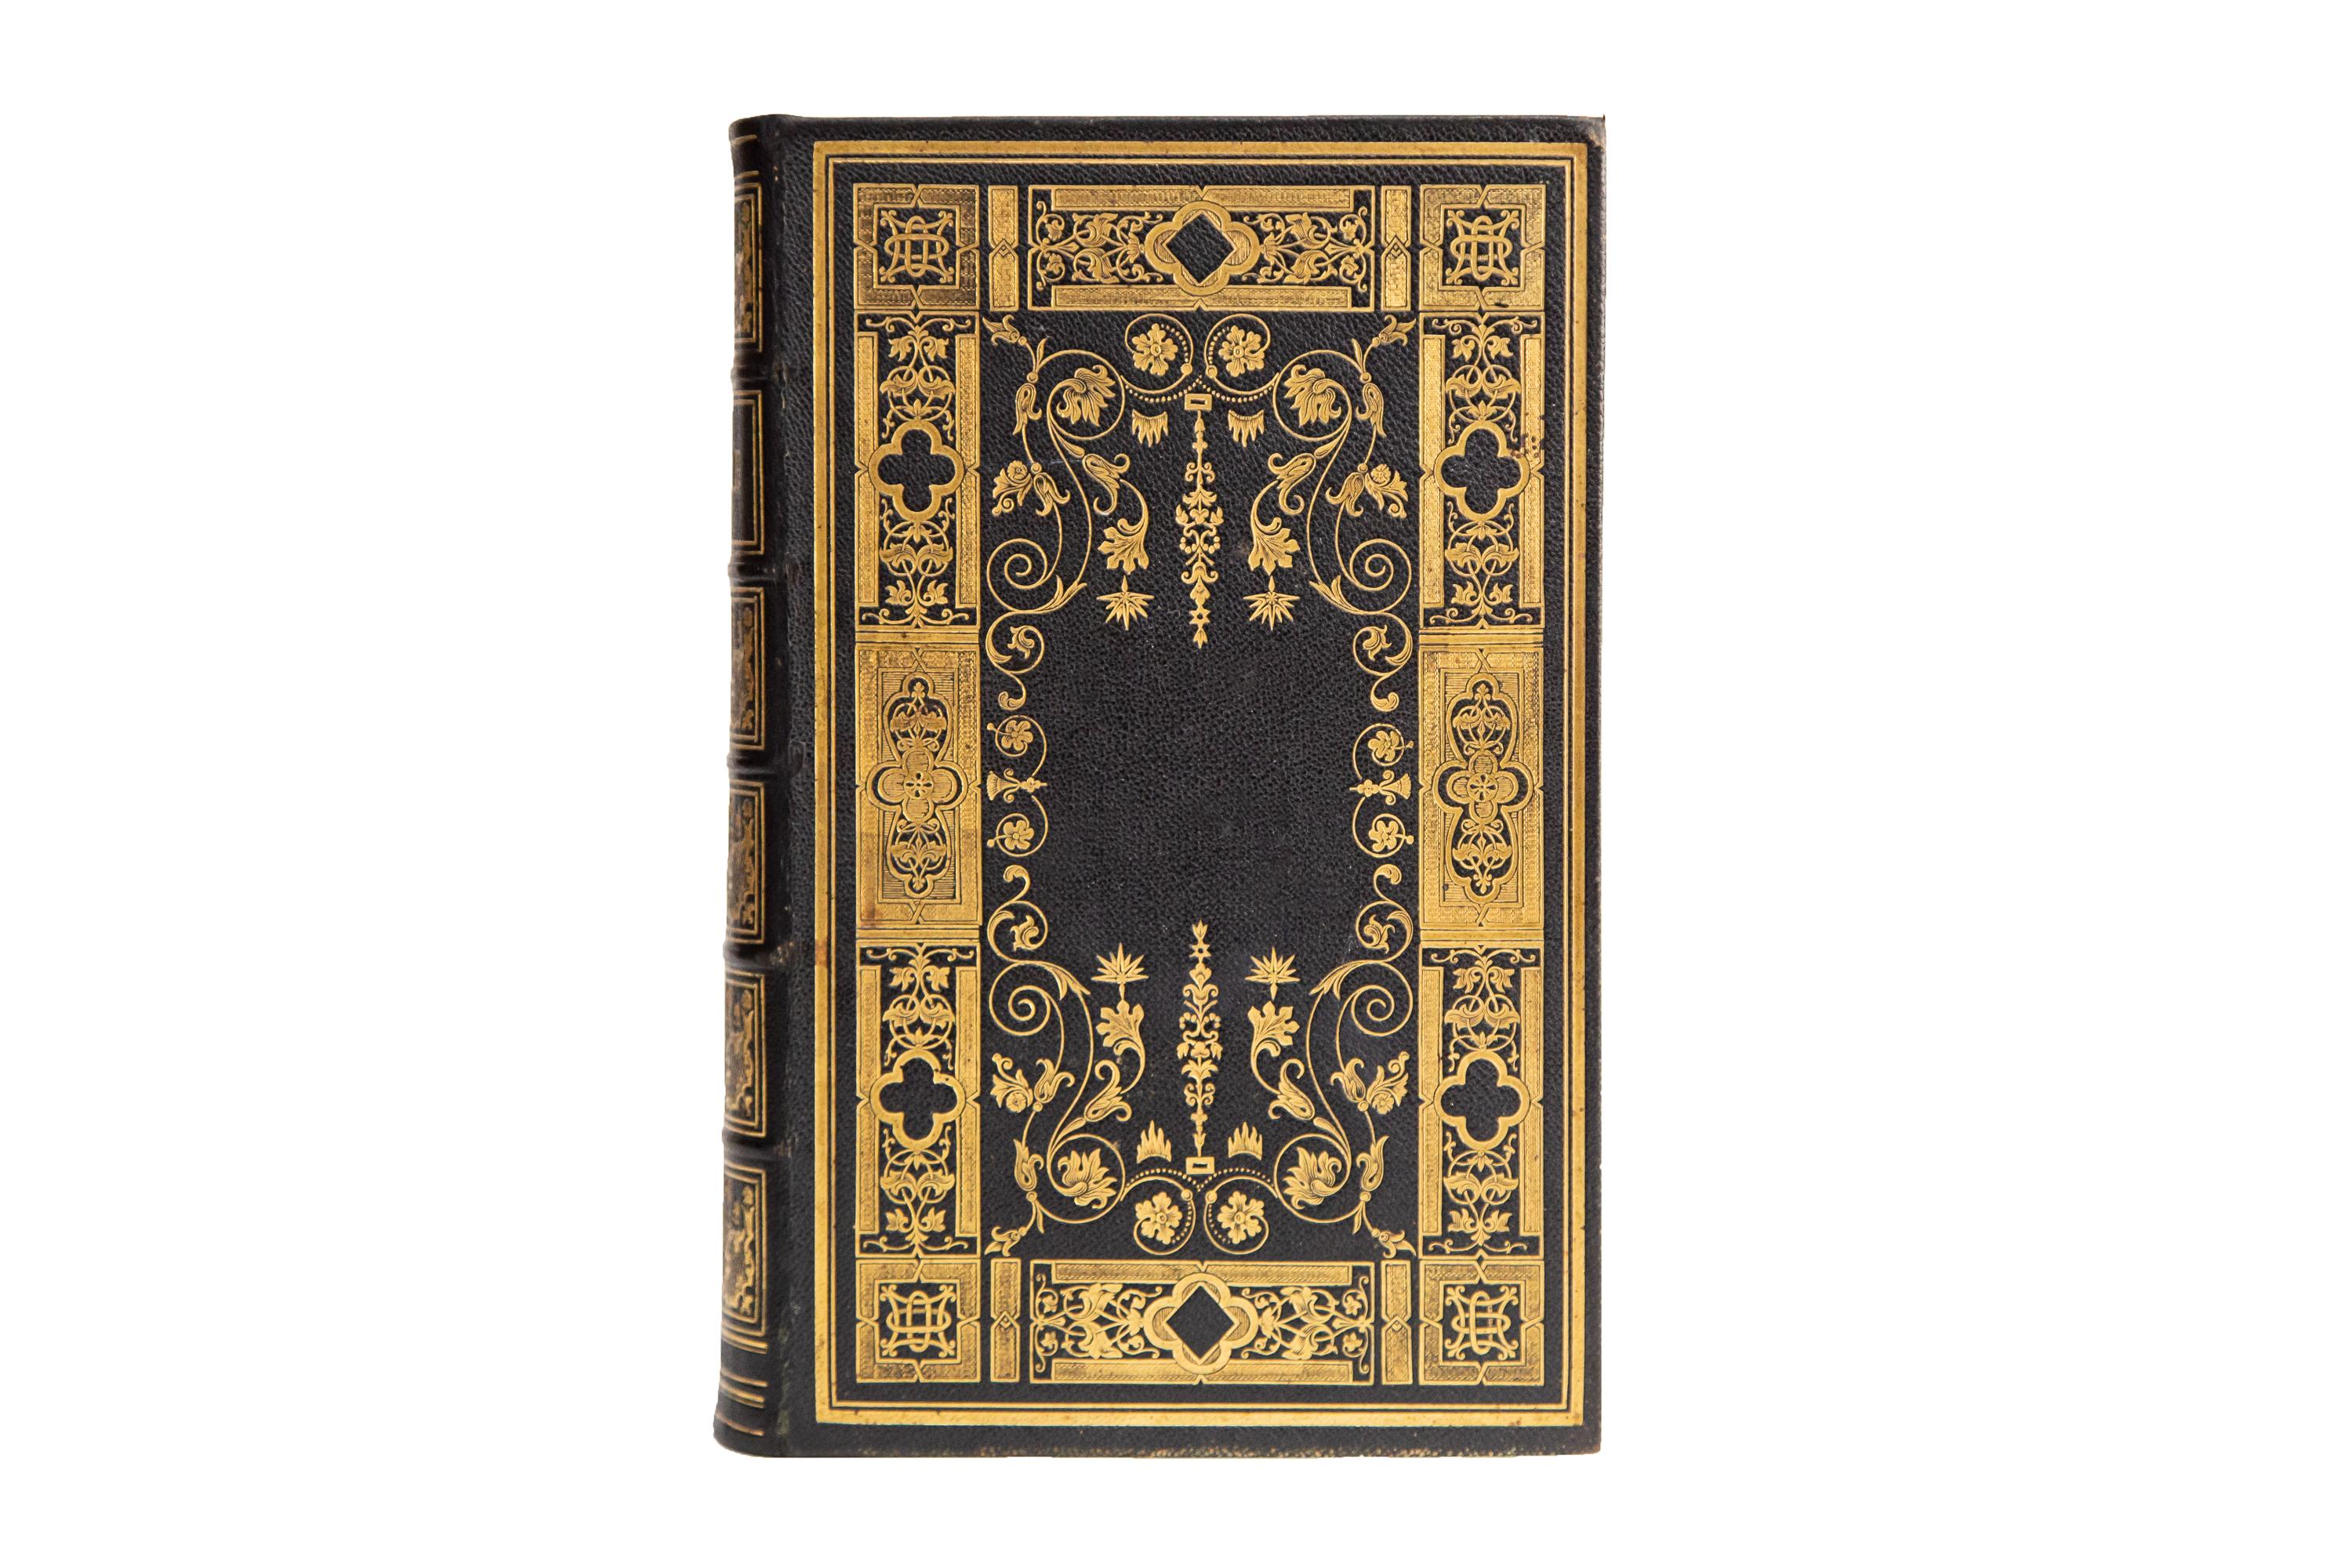 1 Volume. (Anon) The Holy Bible. Bound in full black morocco with covers displaying incredibly intricate gilt tooling with many floral designs and ornate bordering details. Raised bands with similarly ornate panel details and label lettering in gilt